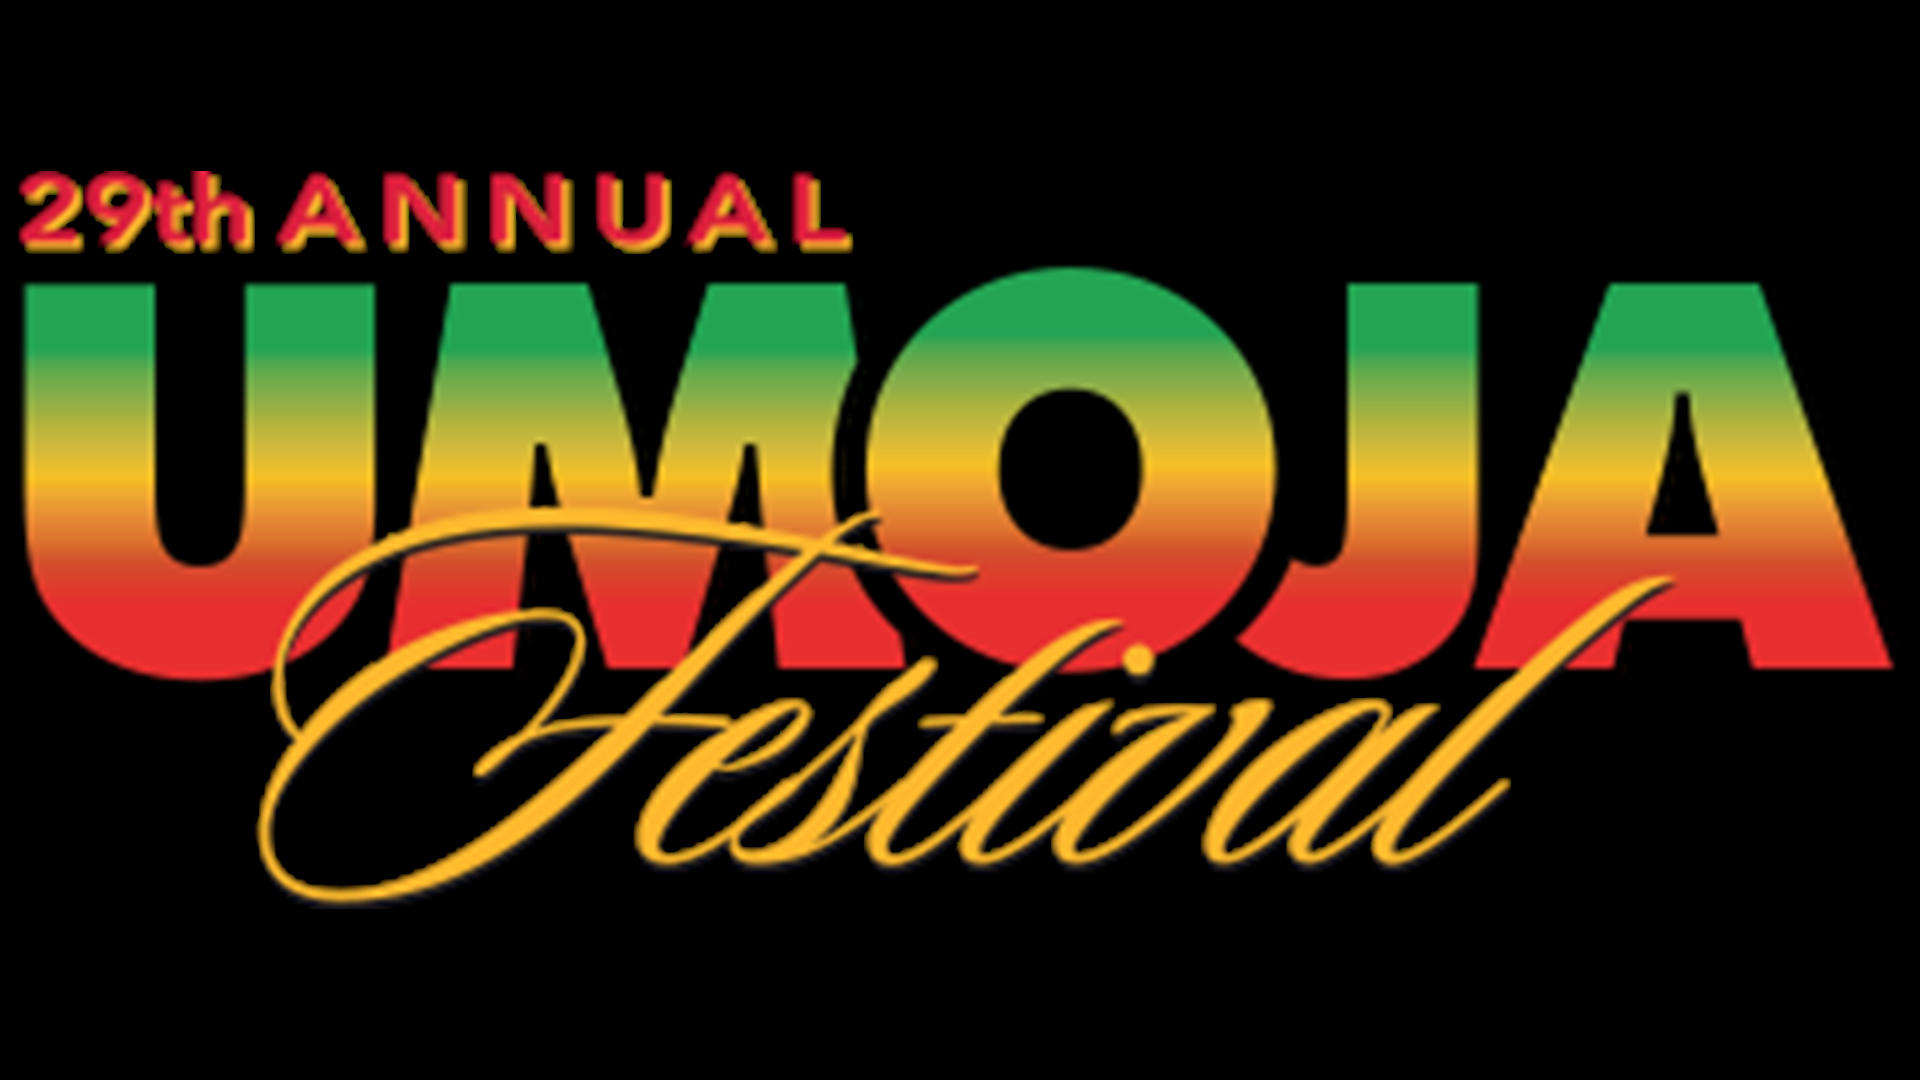 The 29th Annual Umoja Festival is happening this weekend!